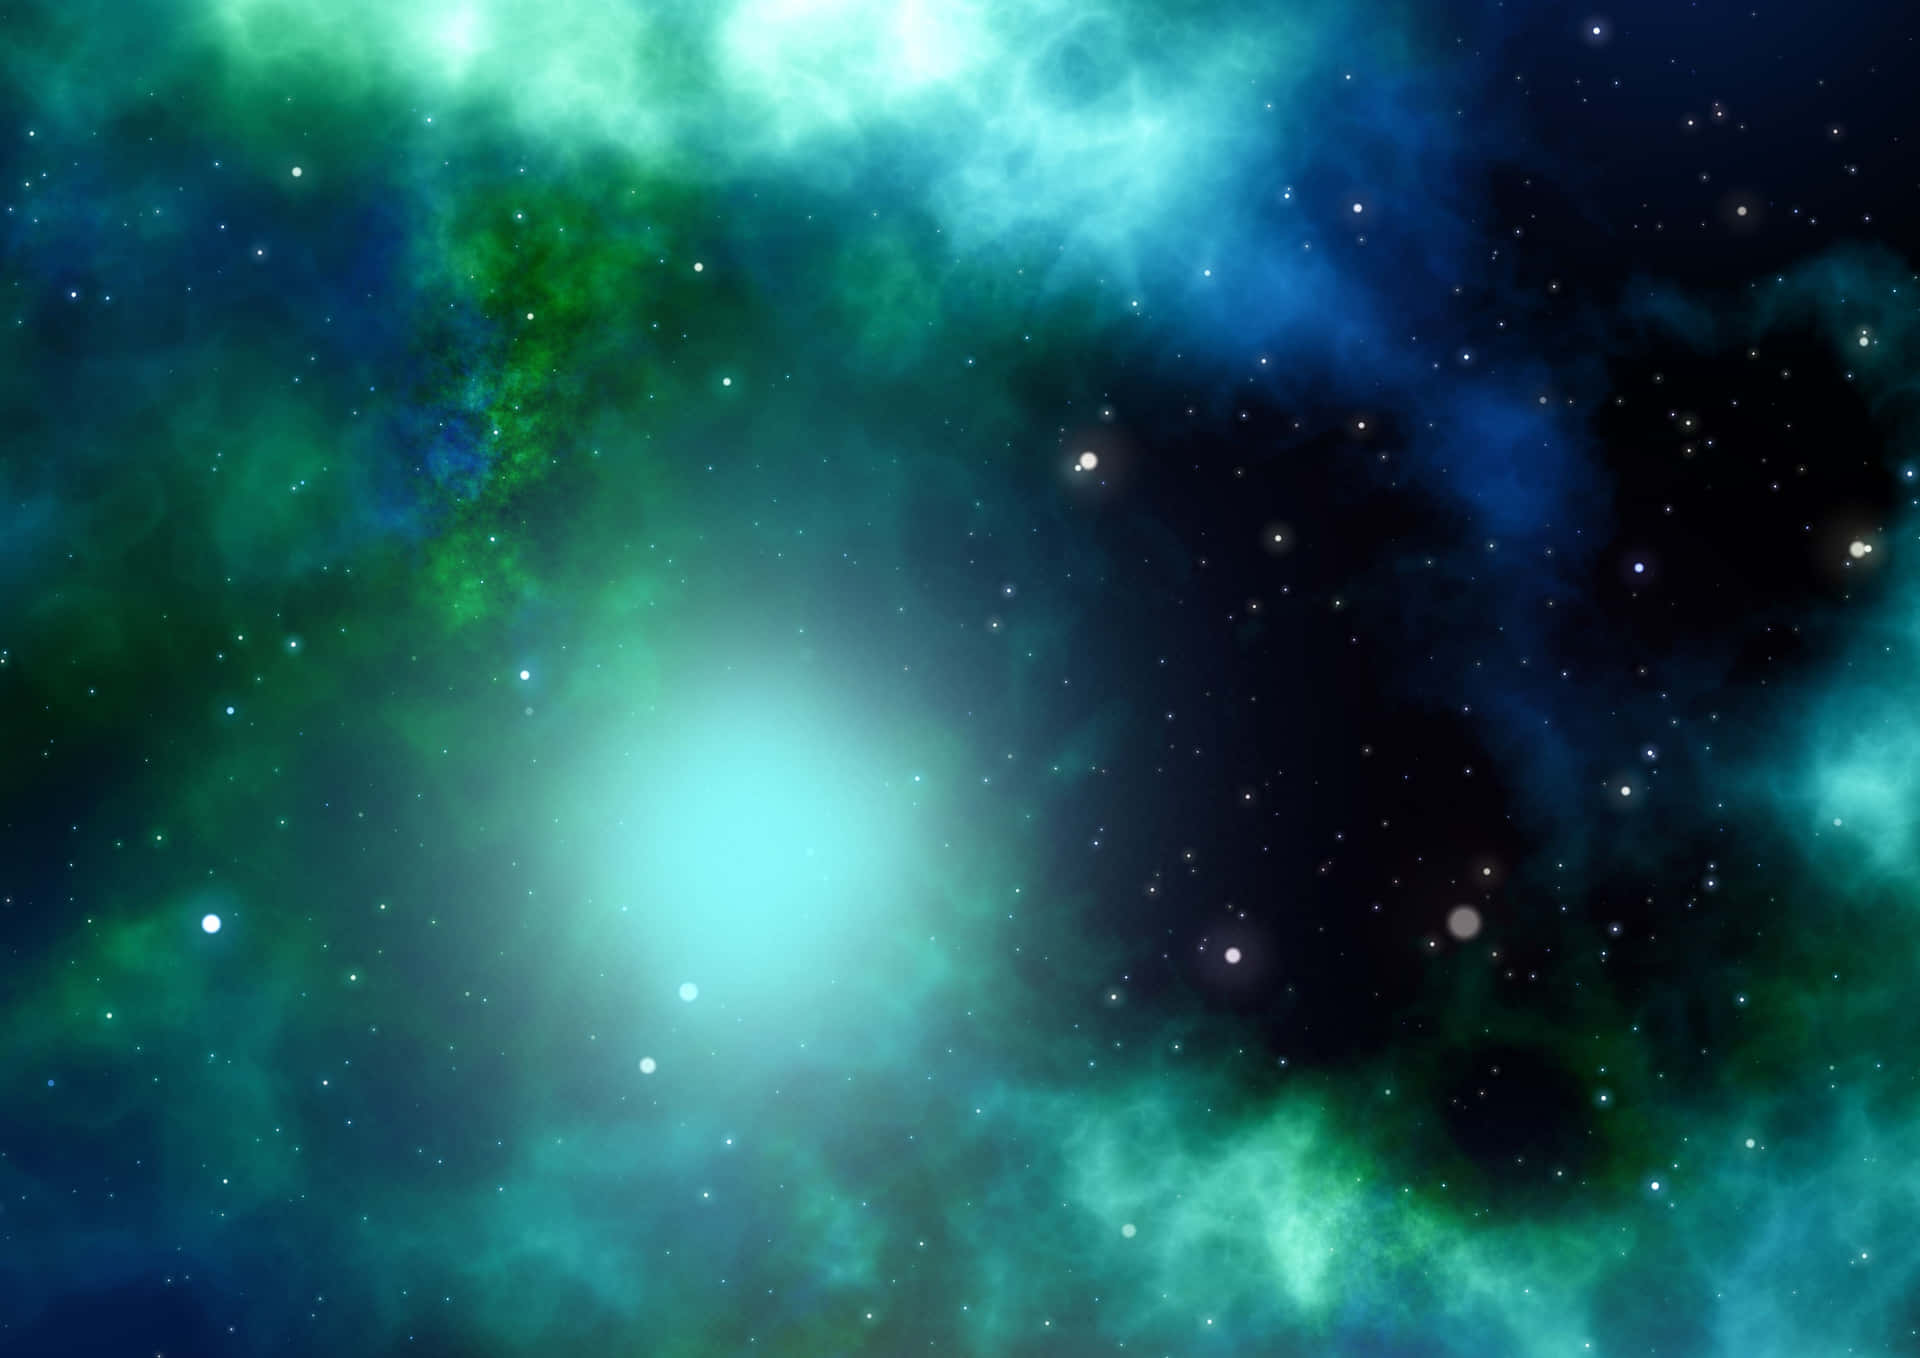 A View of the Vibrant Green and Blue Galaxy Wallpaper